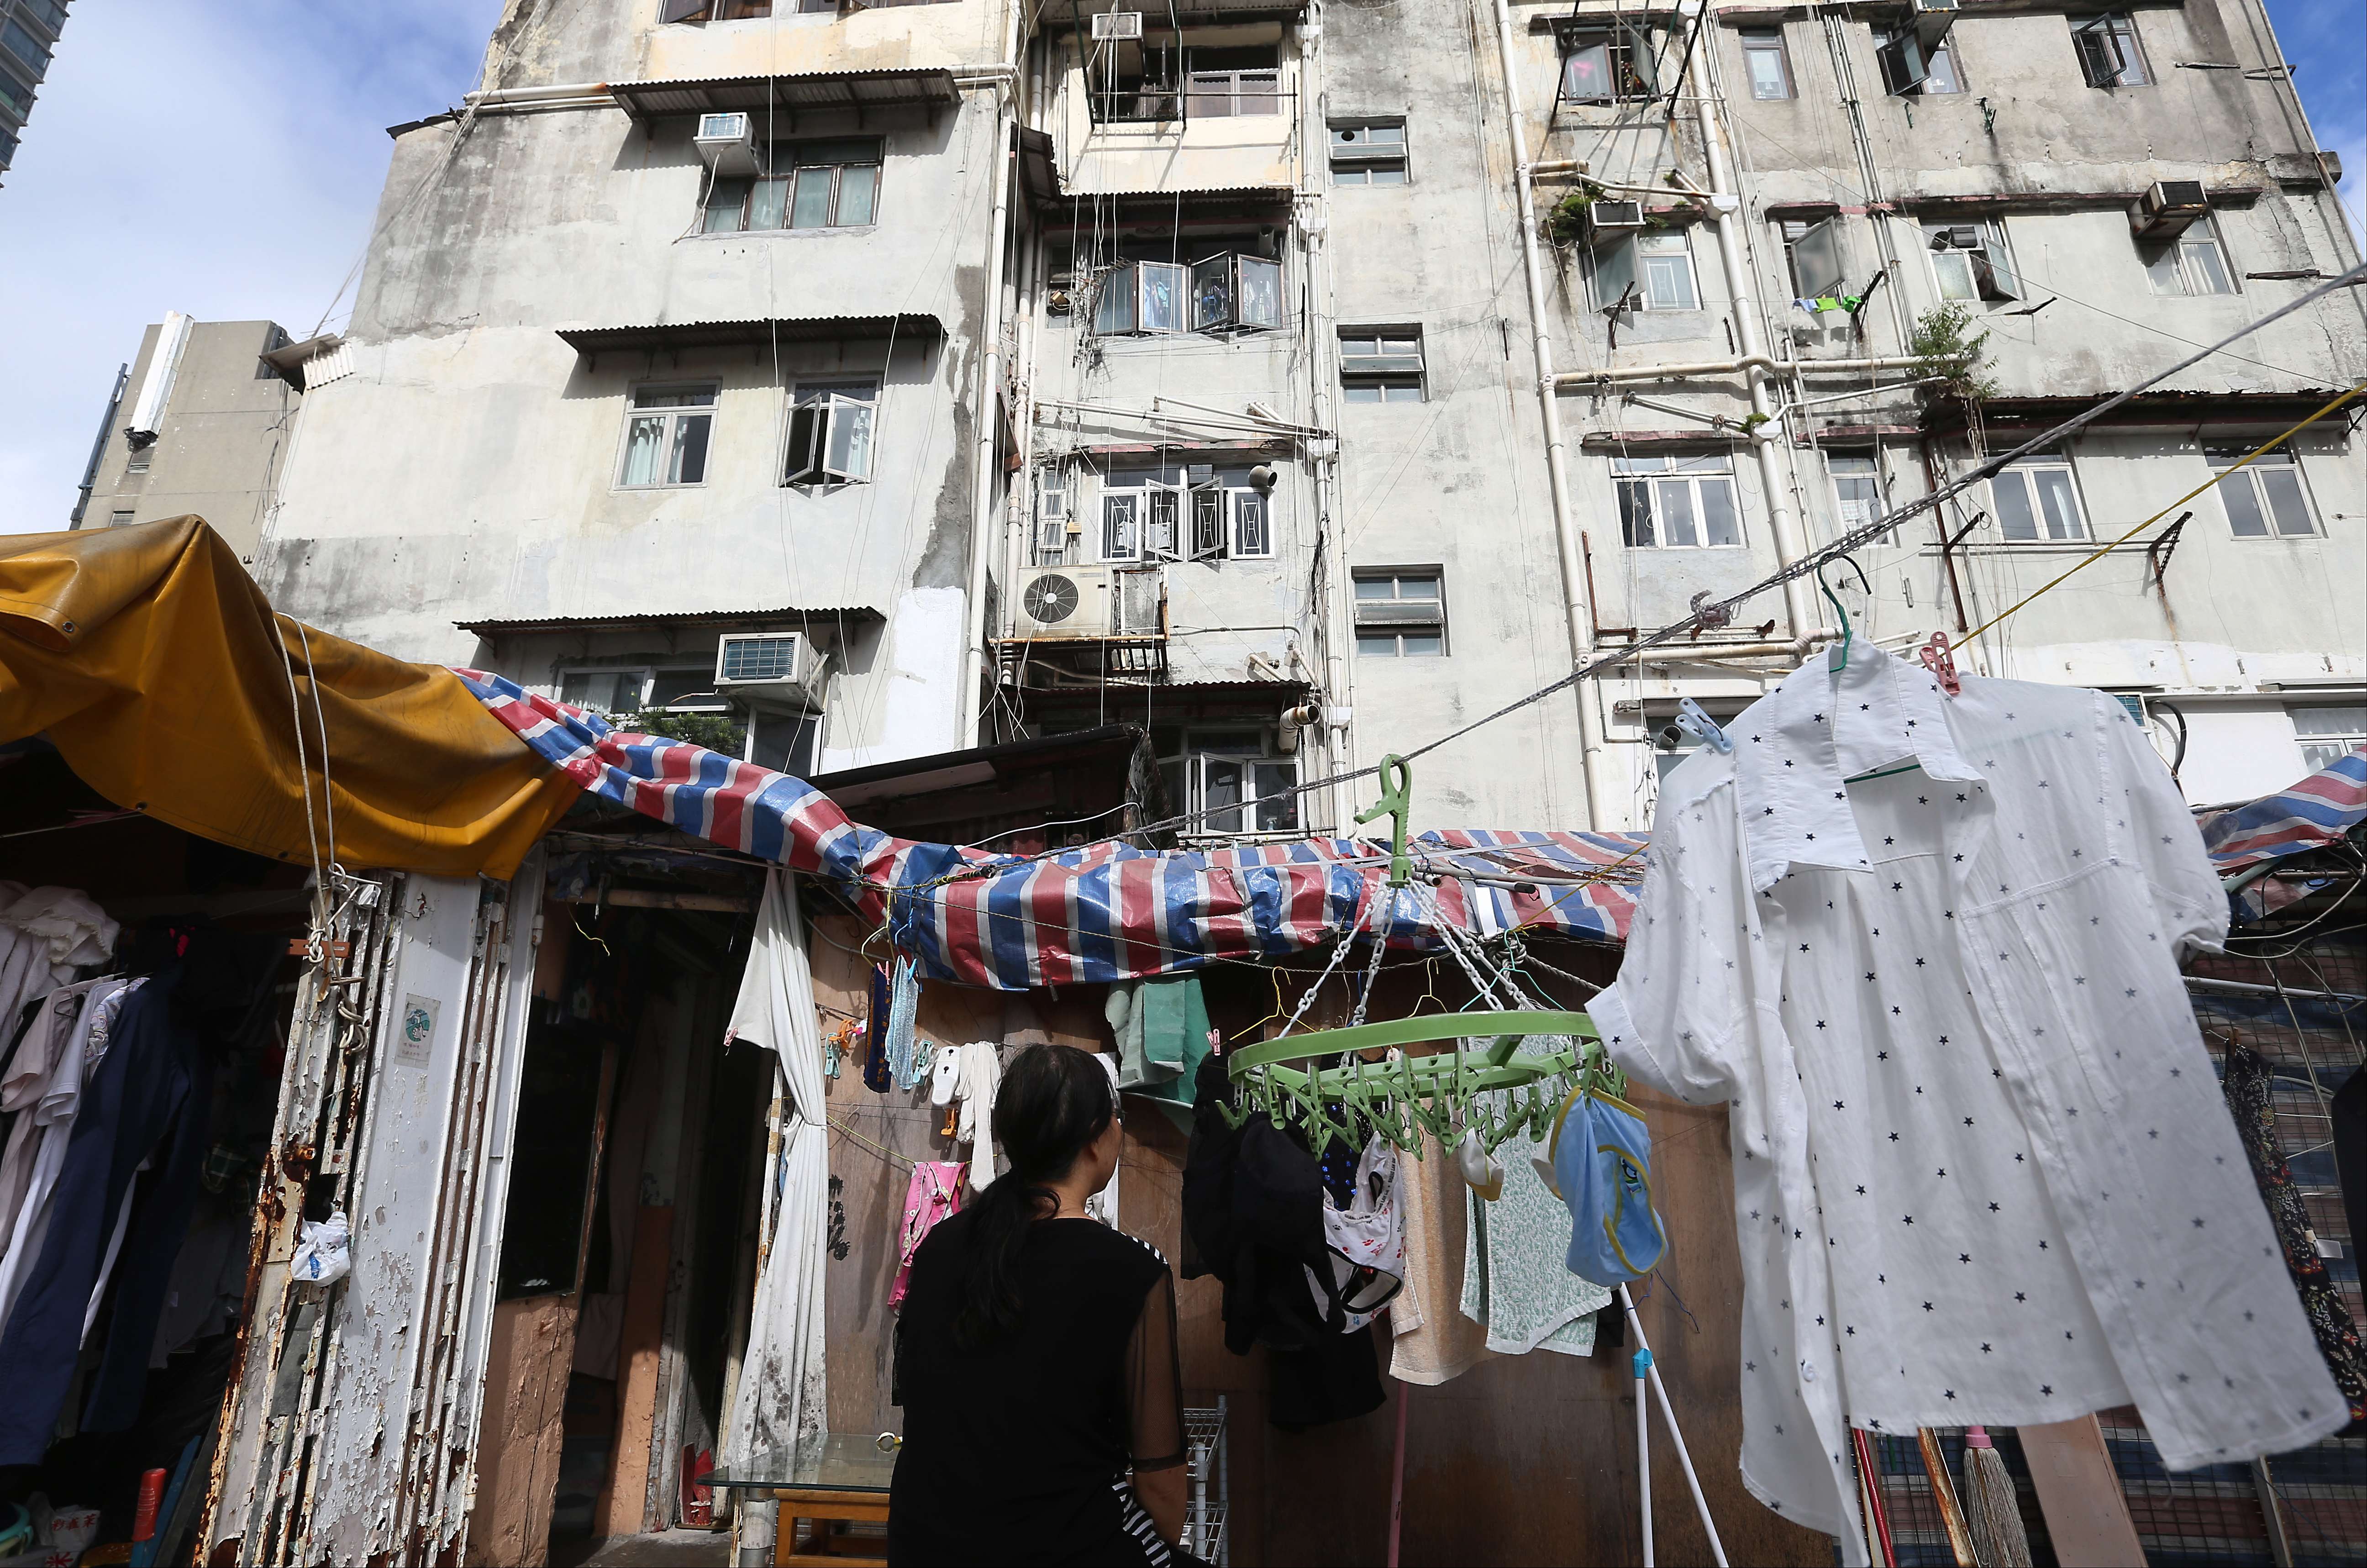 Thousands live in illegal subdivided residential units, yet those on rooftops are particularly vulnerable to eviction because of their visibility